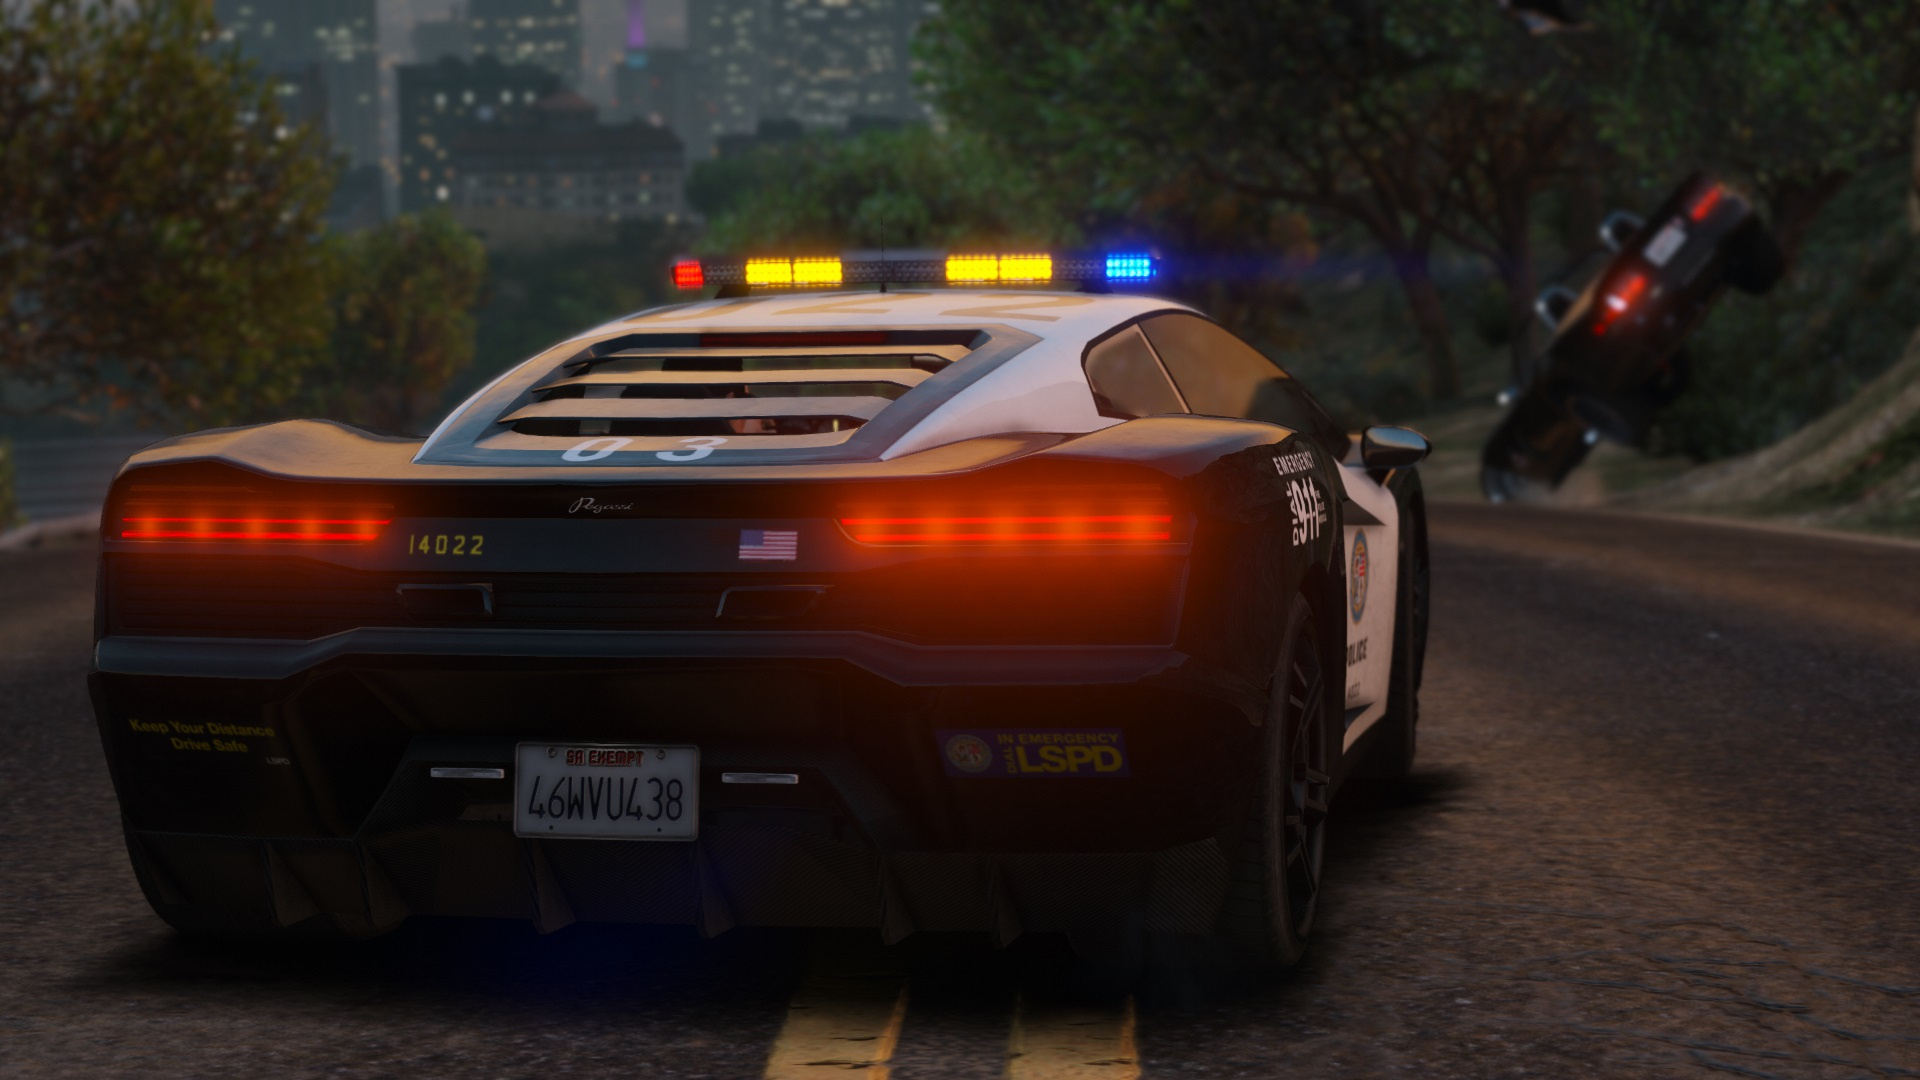 how to download lspdfr on xbox one